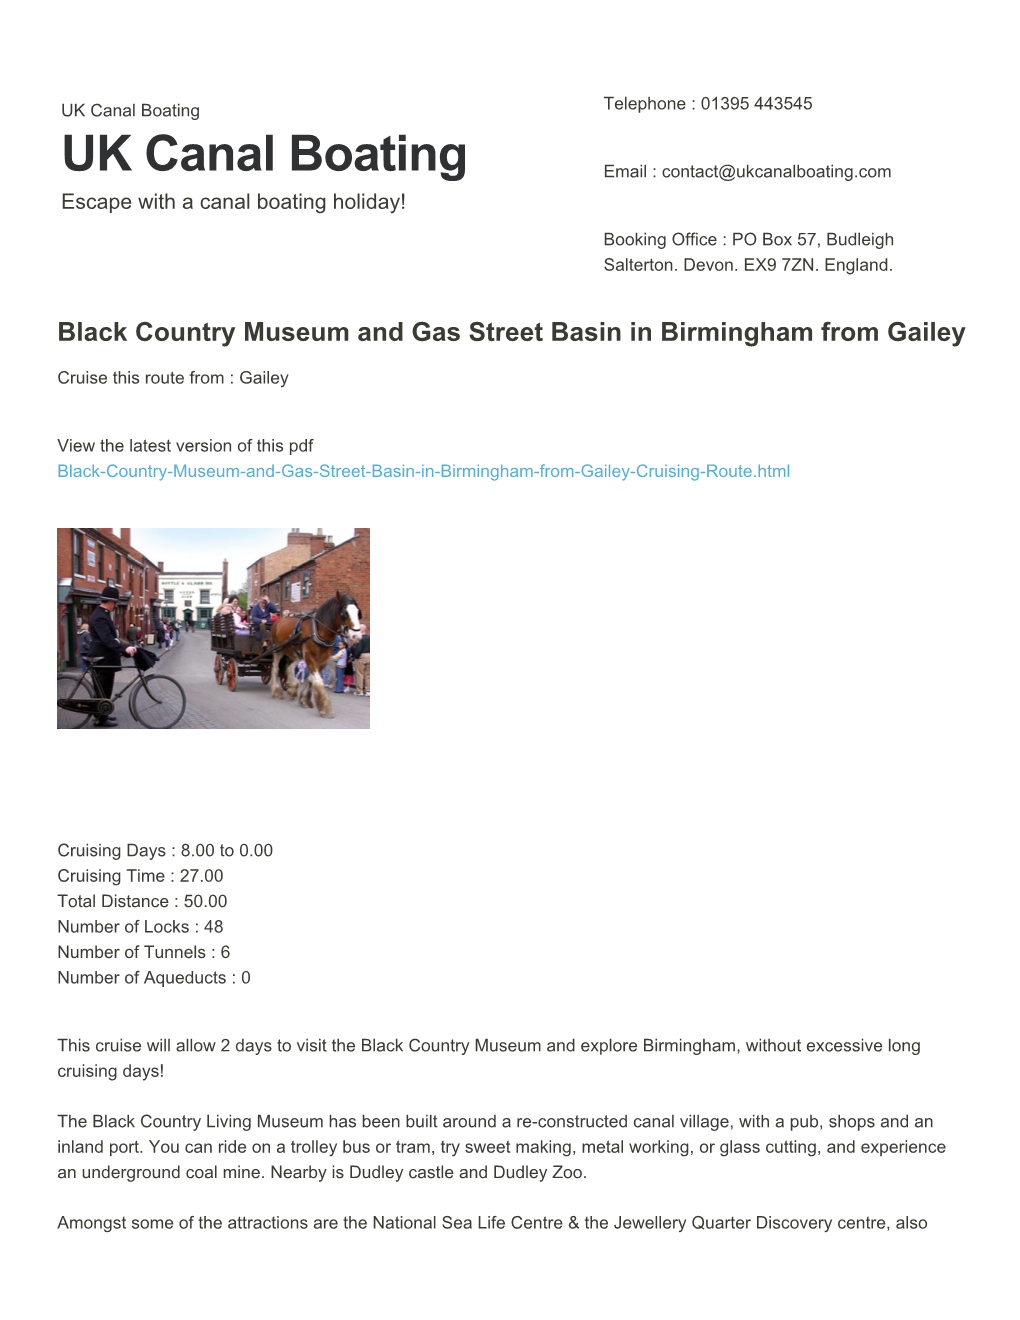 Black Country Museum and Gas Street Basin in Birmingham from Gailey | UK Canal Boating